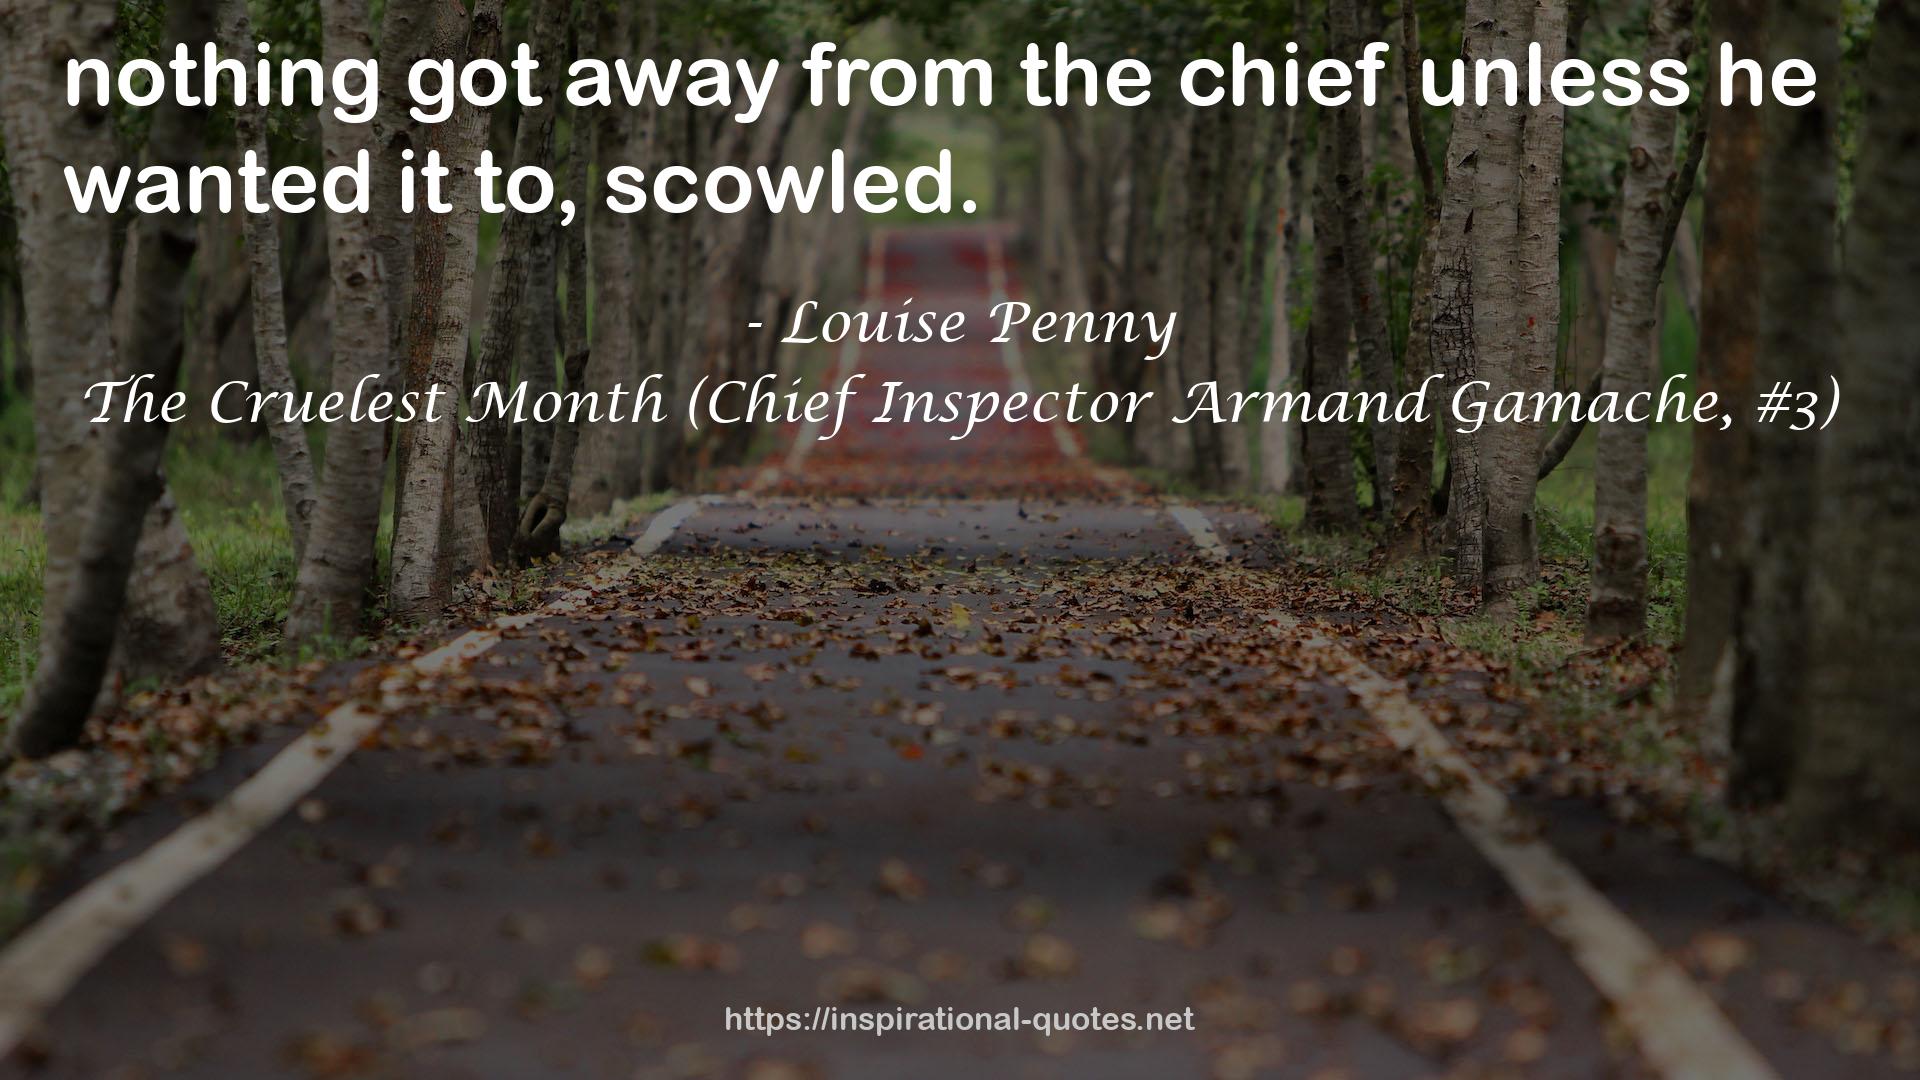 The Cruelest Month (Chief Inspector Armand Gamache, #3) QUOTES